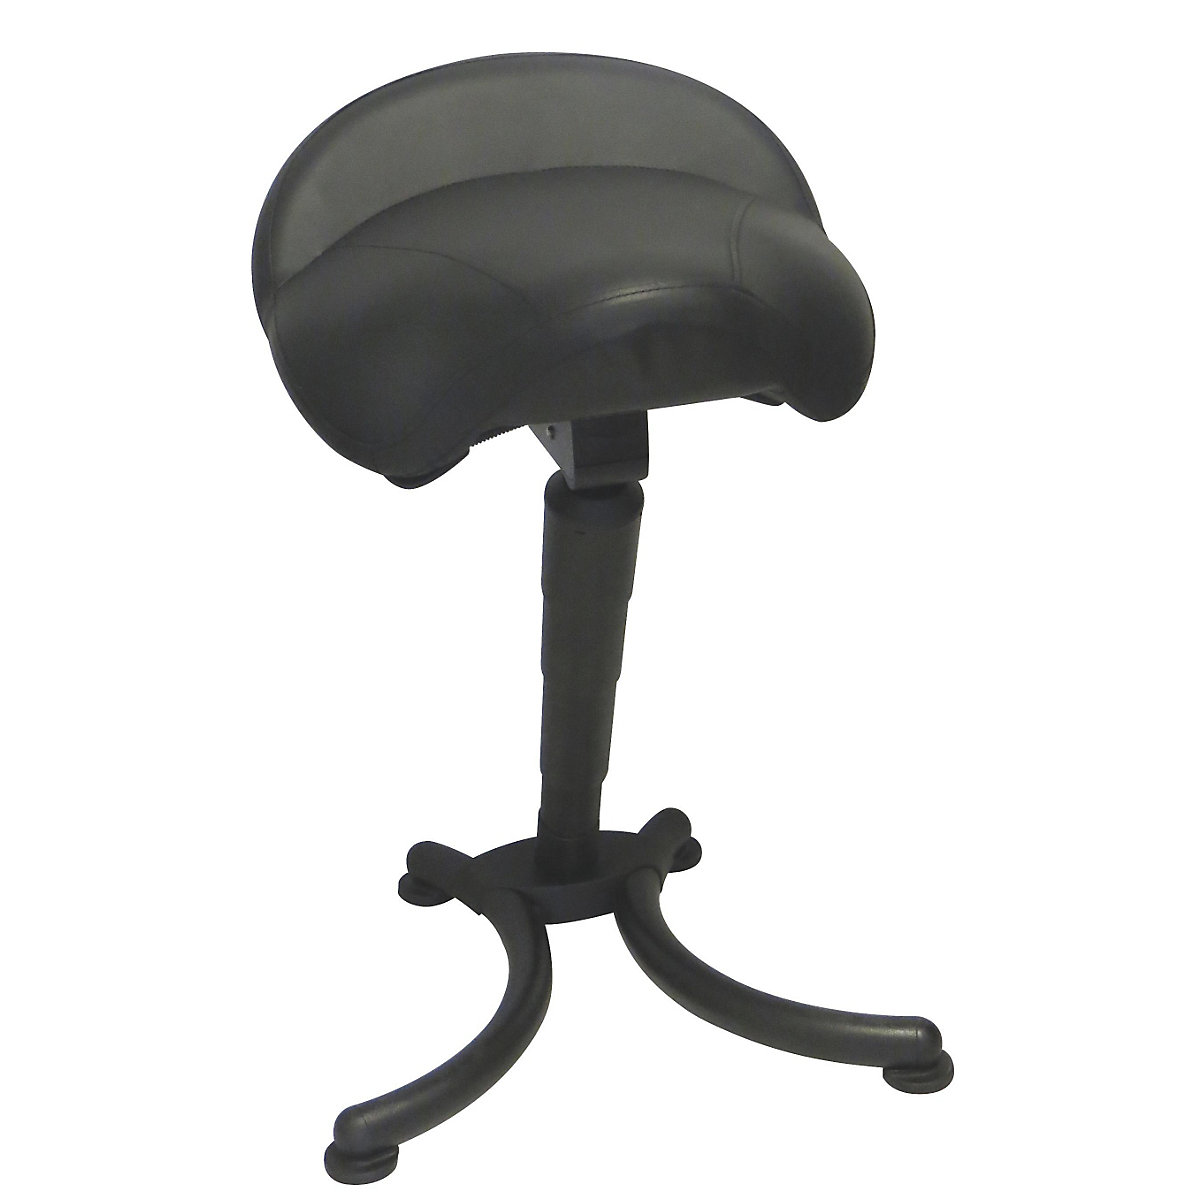 Anti-fatigue stool with comfort seat - meychair